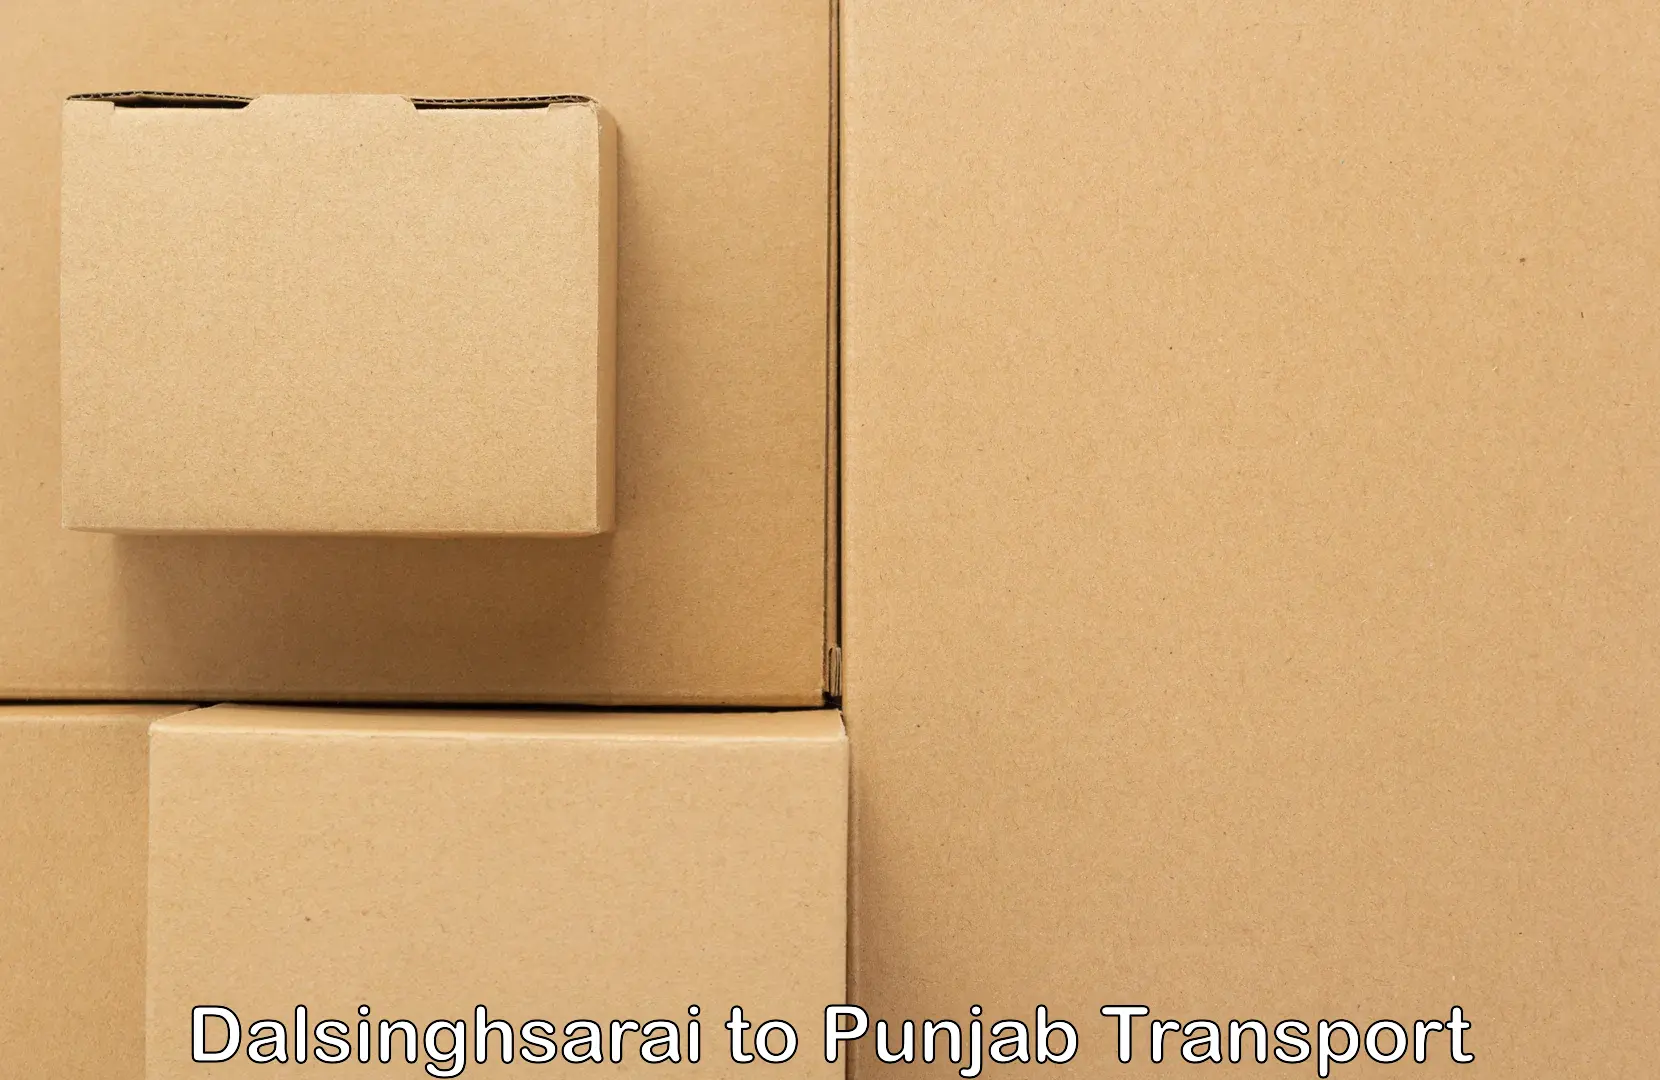 Pick up transport service in Dalsinghsarai to Amritsar